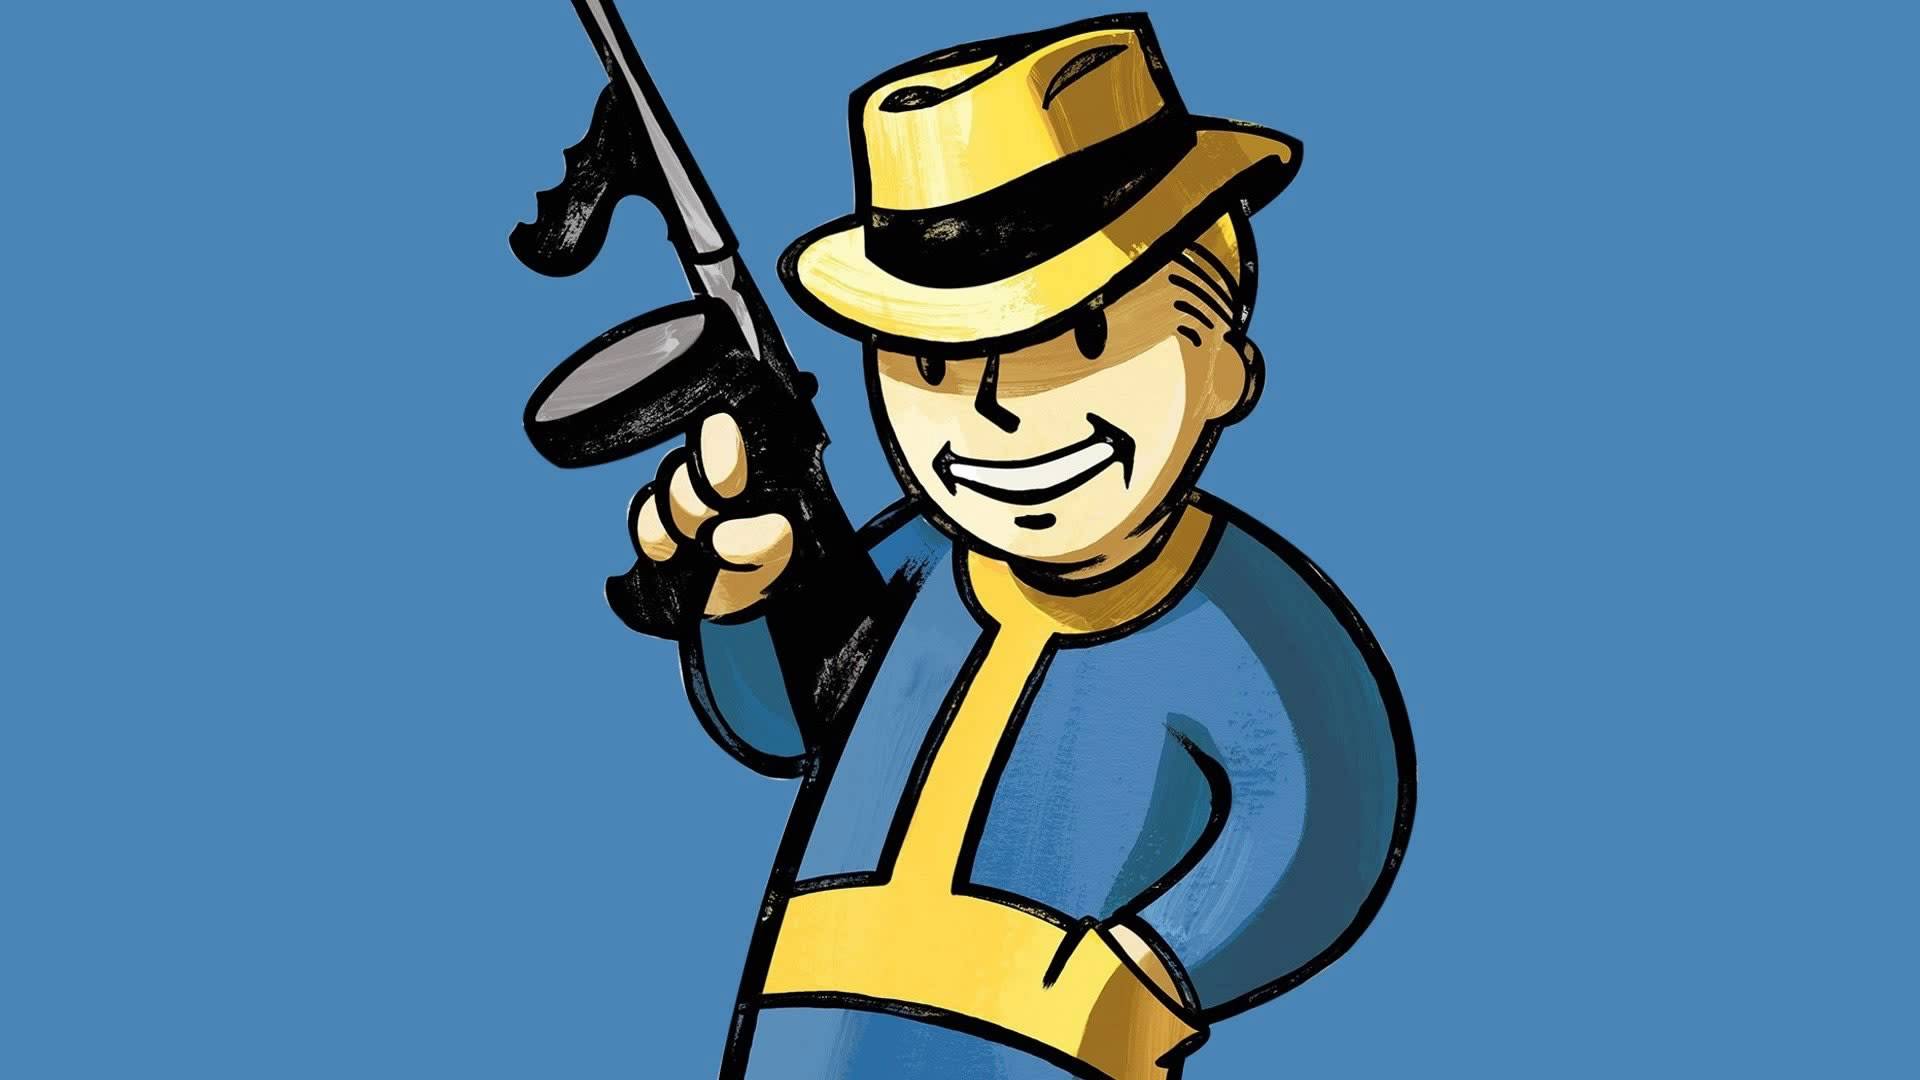 Fallout Shelter Wallpapers Wallpaper Cave